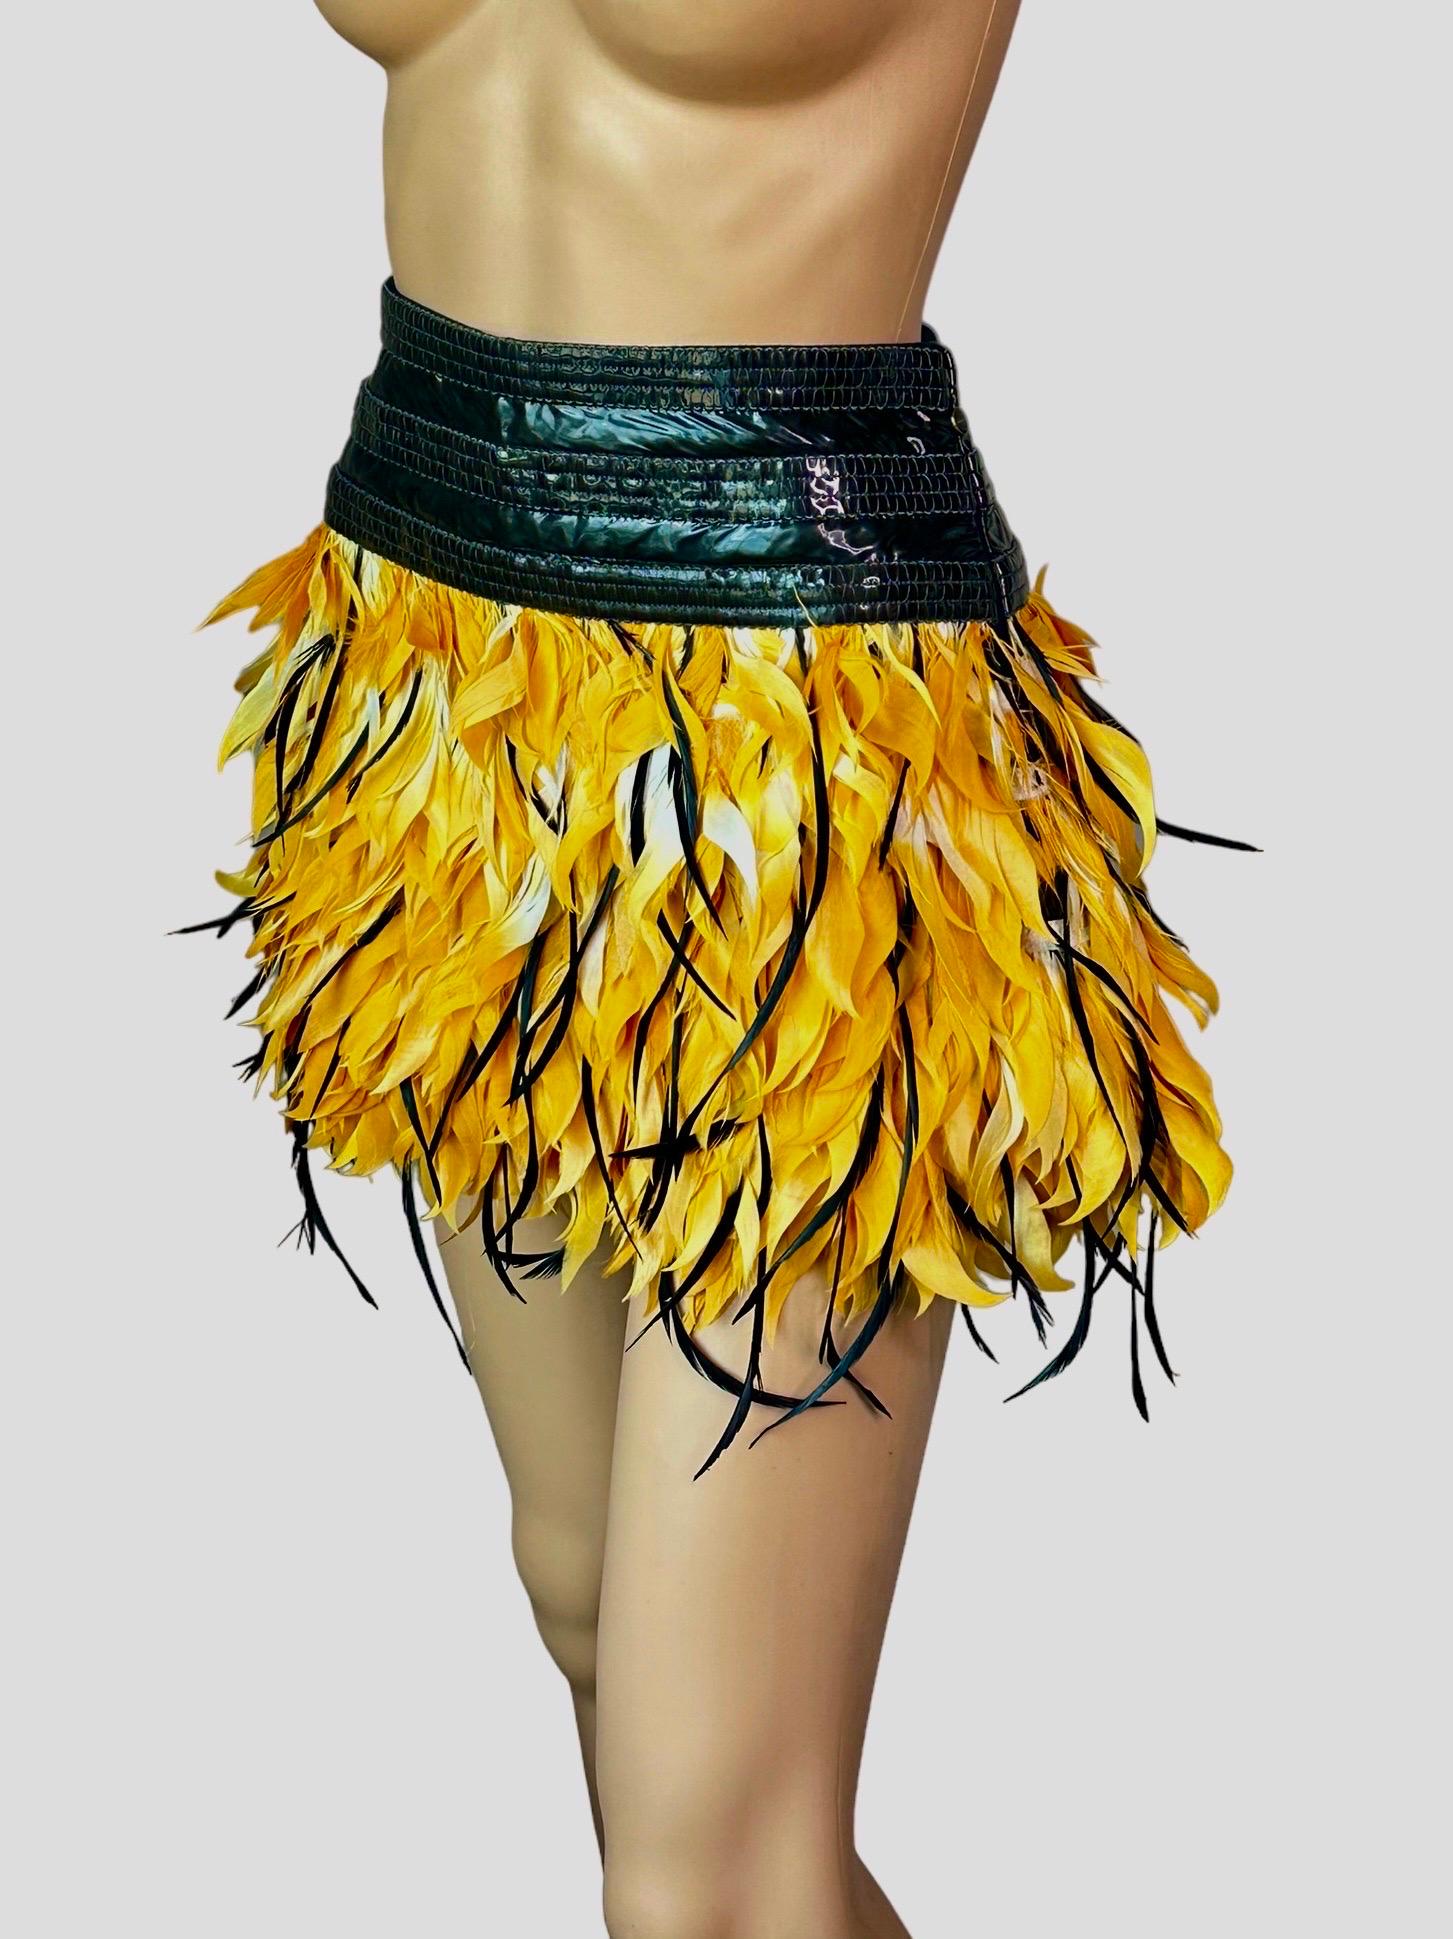 Roberto Cavalli Just Cavalli Feather Yellow Mini Skirt In Good Condition For Sale In Naples, FL